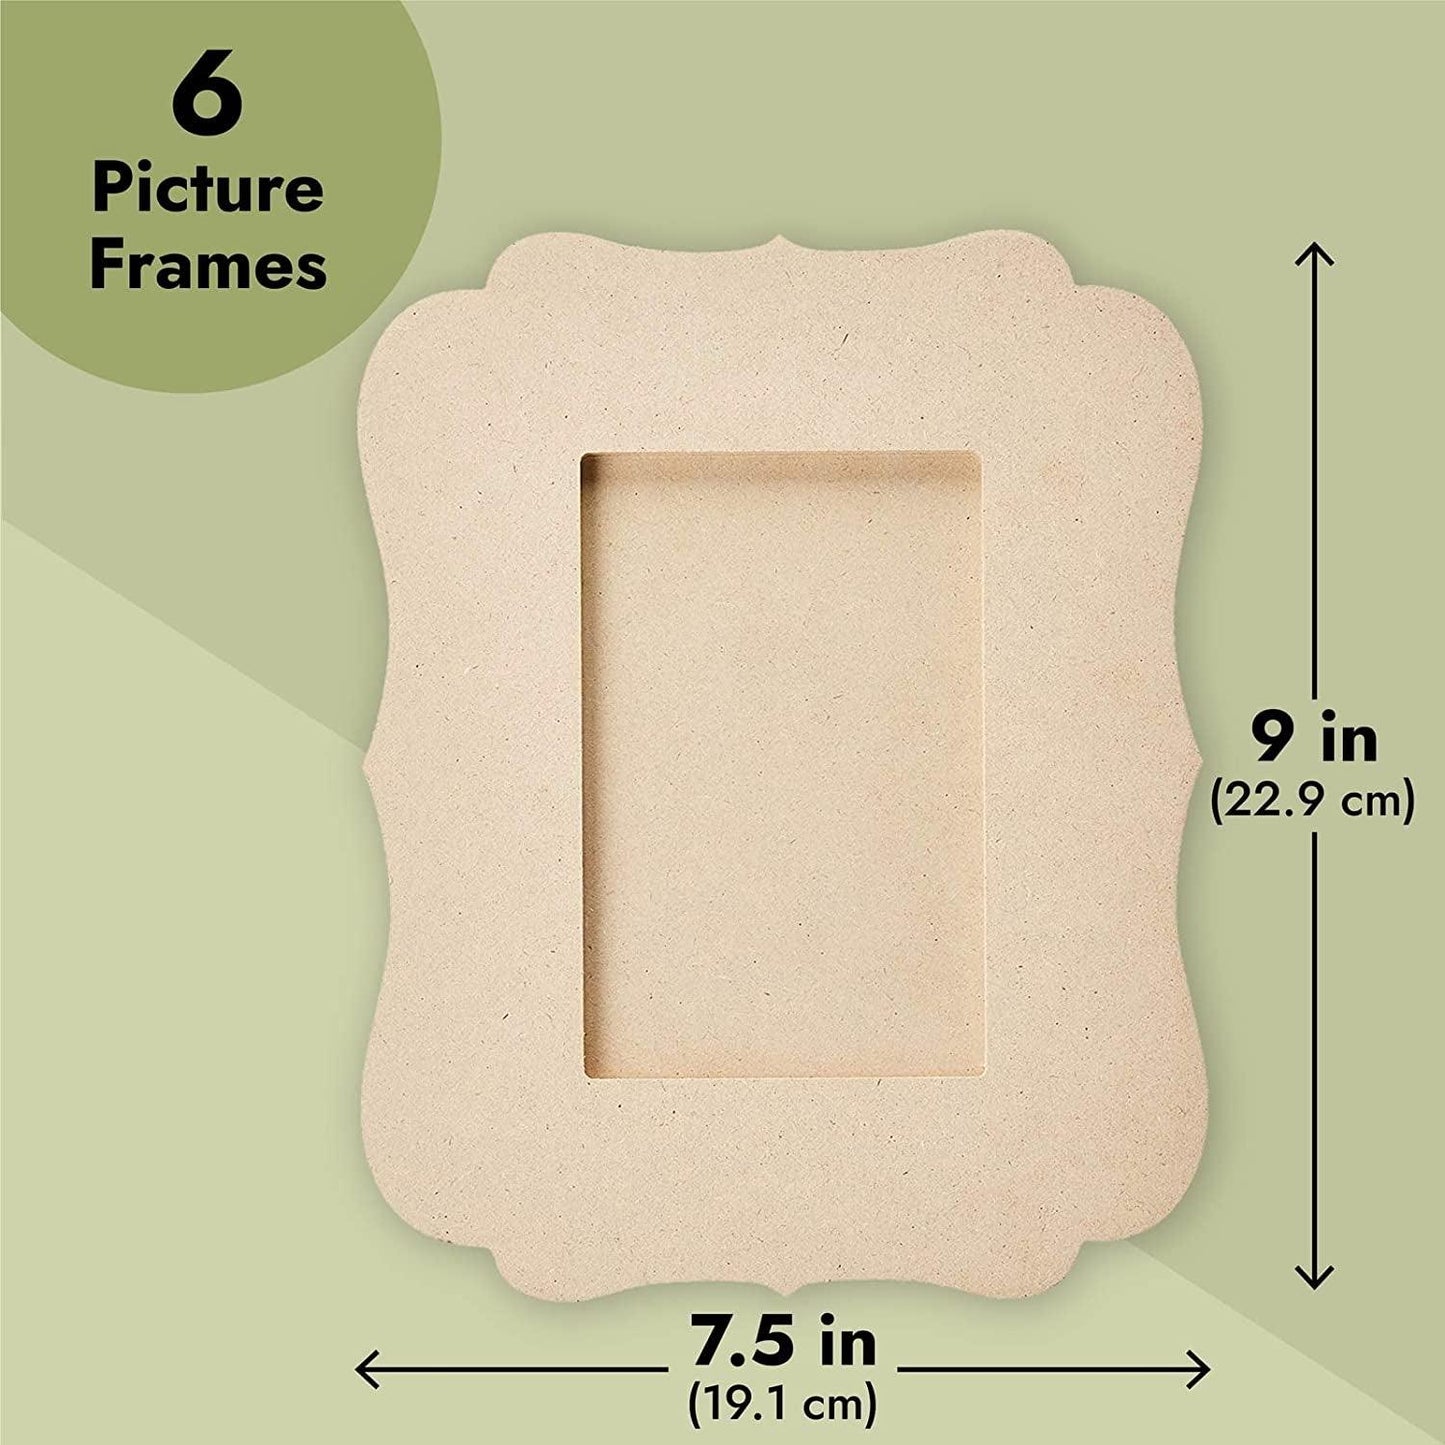 6-Pack Unfinished Wood Picture Frames, Holds 4X6" Photos Wooden Photo Frame DIY Crafts - WoodArtSupply